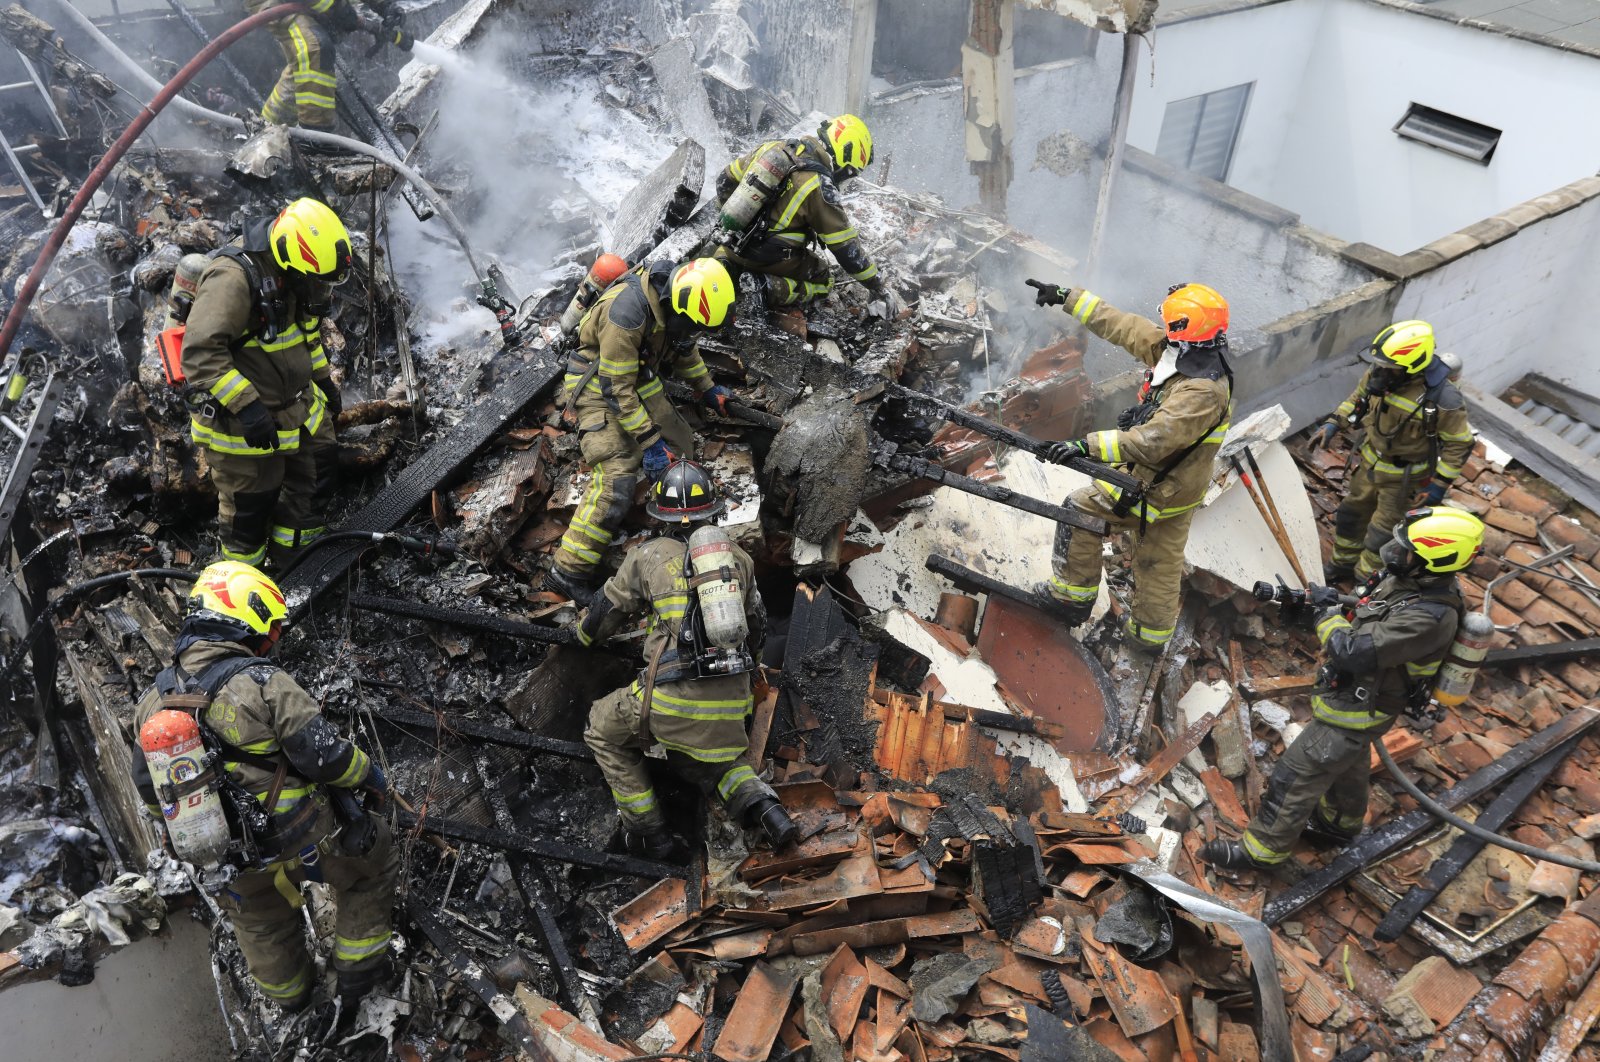 Firefighters work at the crash site of a small plane that fell on top of homes in a residential area of Medellin, Colombia, Monday, Nov. 21, 2022. (AP Photo)